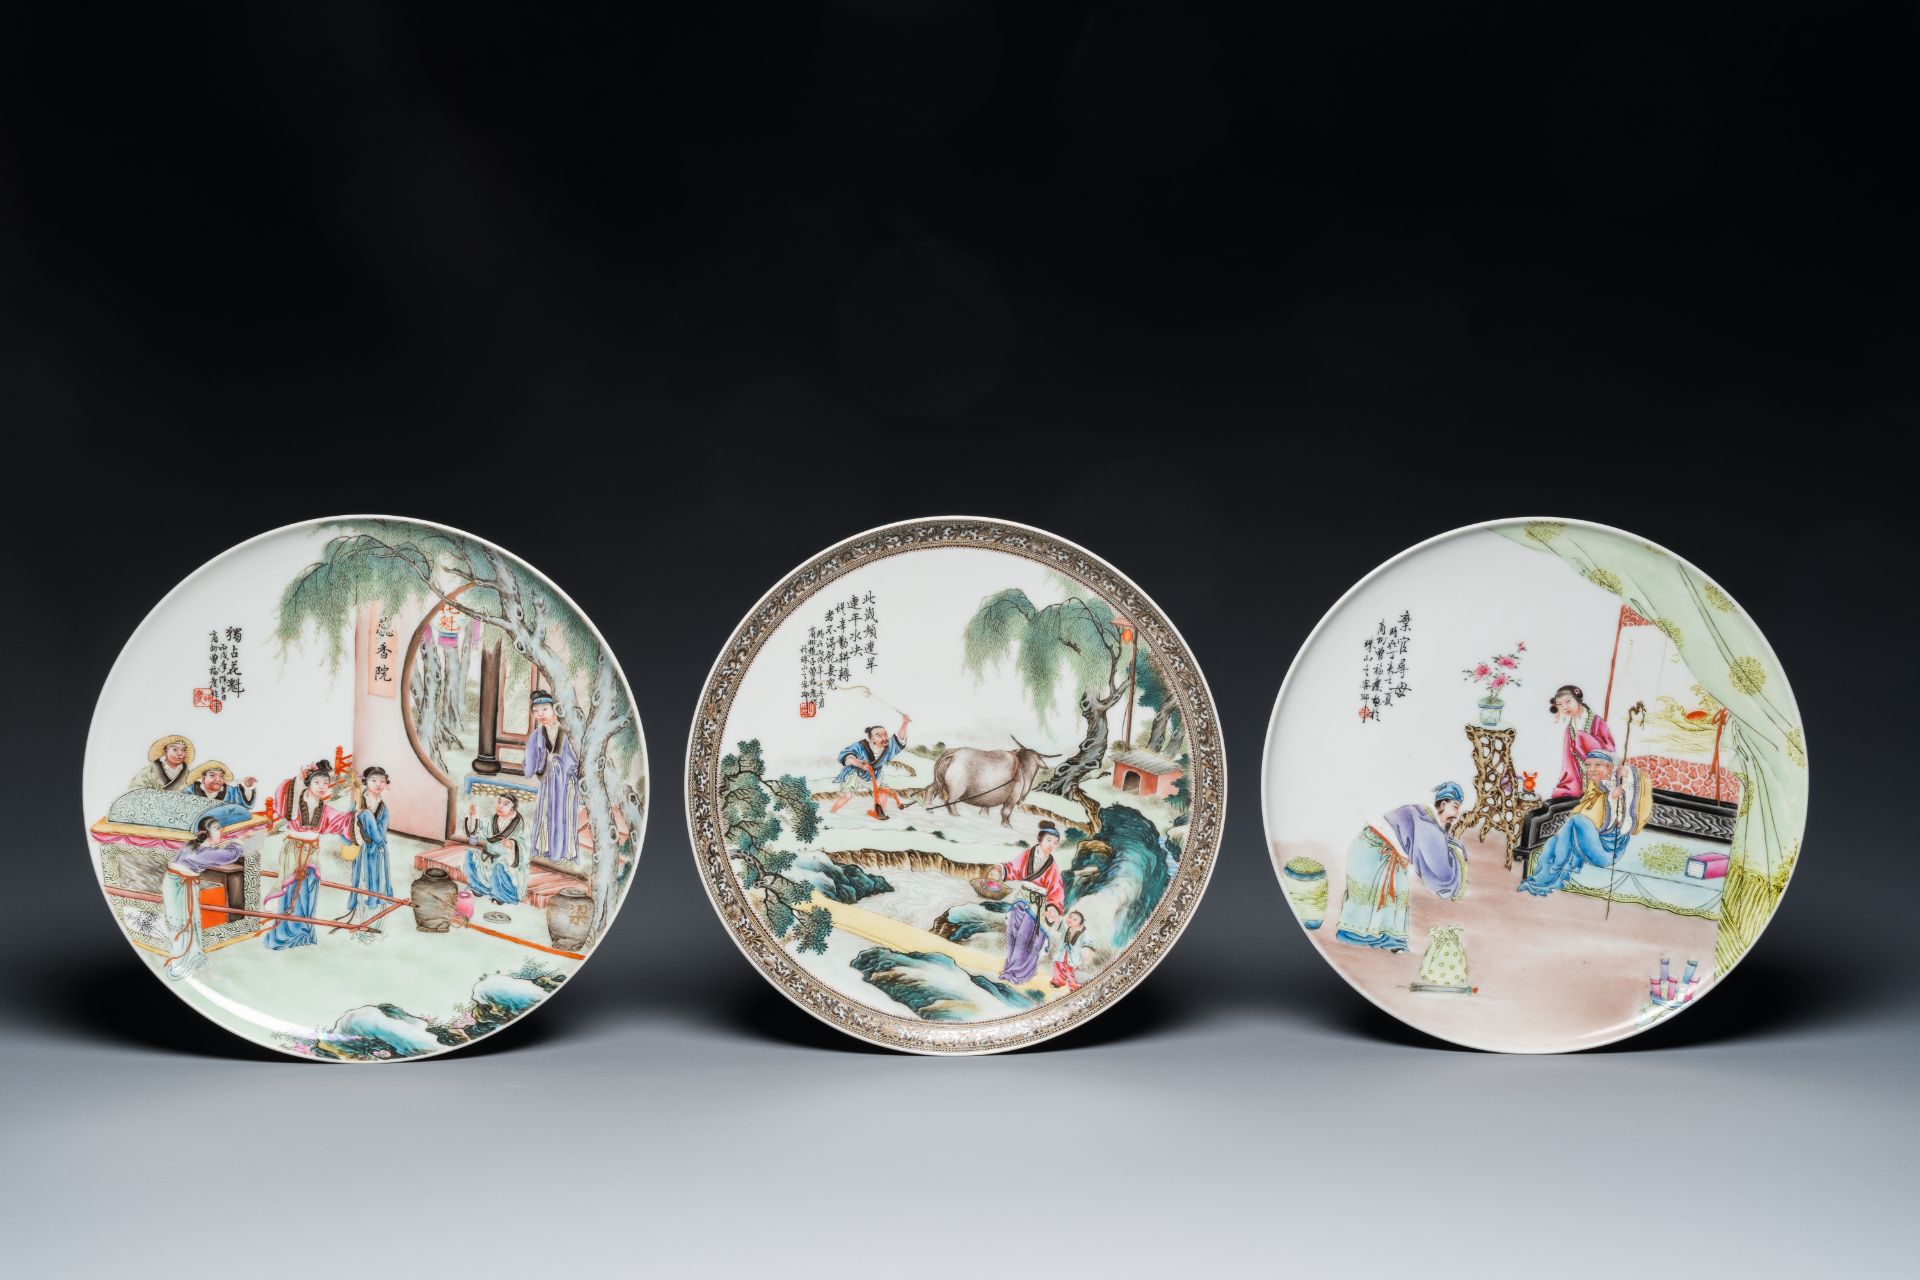 Three Chinese famille rose dishes, signed Zeng Fuqing 曾福慶 and Le Tao Zhai 樂陶齋 seal marks, 1946 & '47 - Image 2 of 3